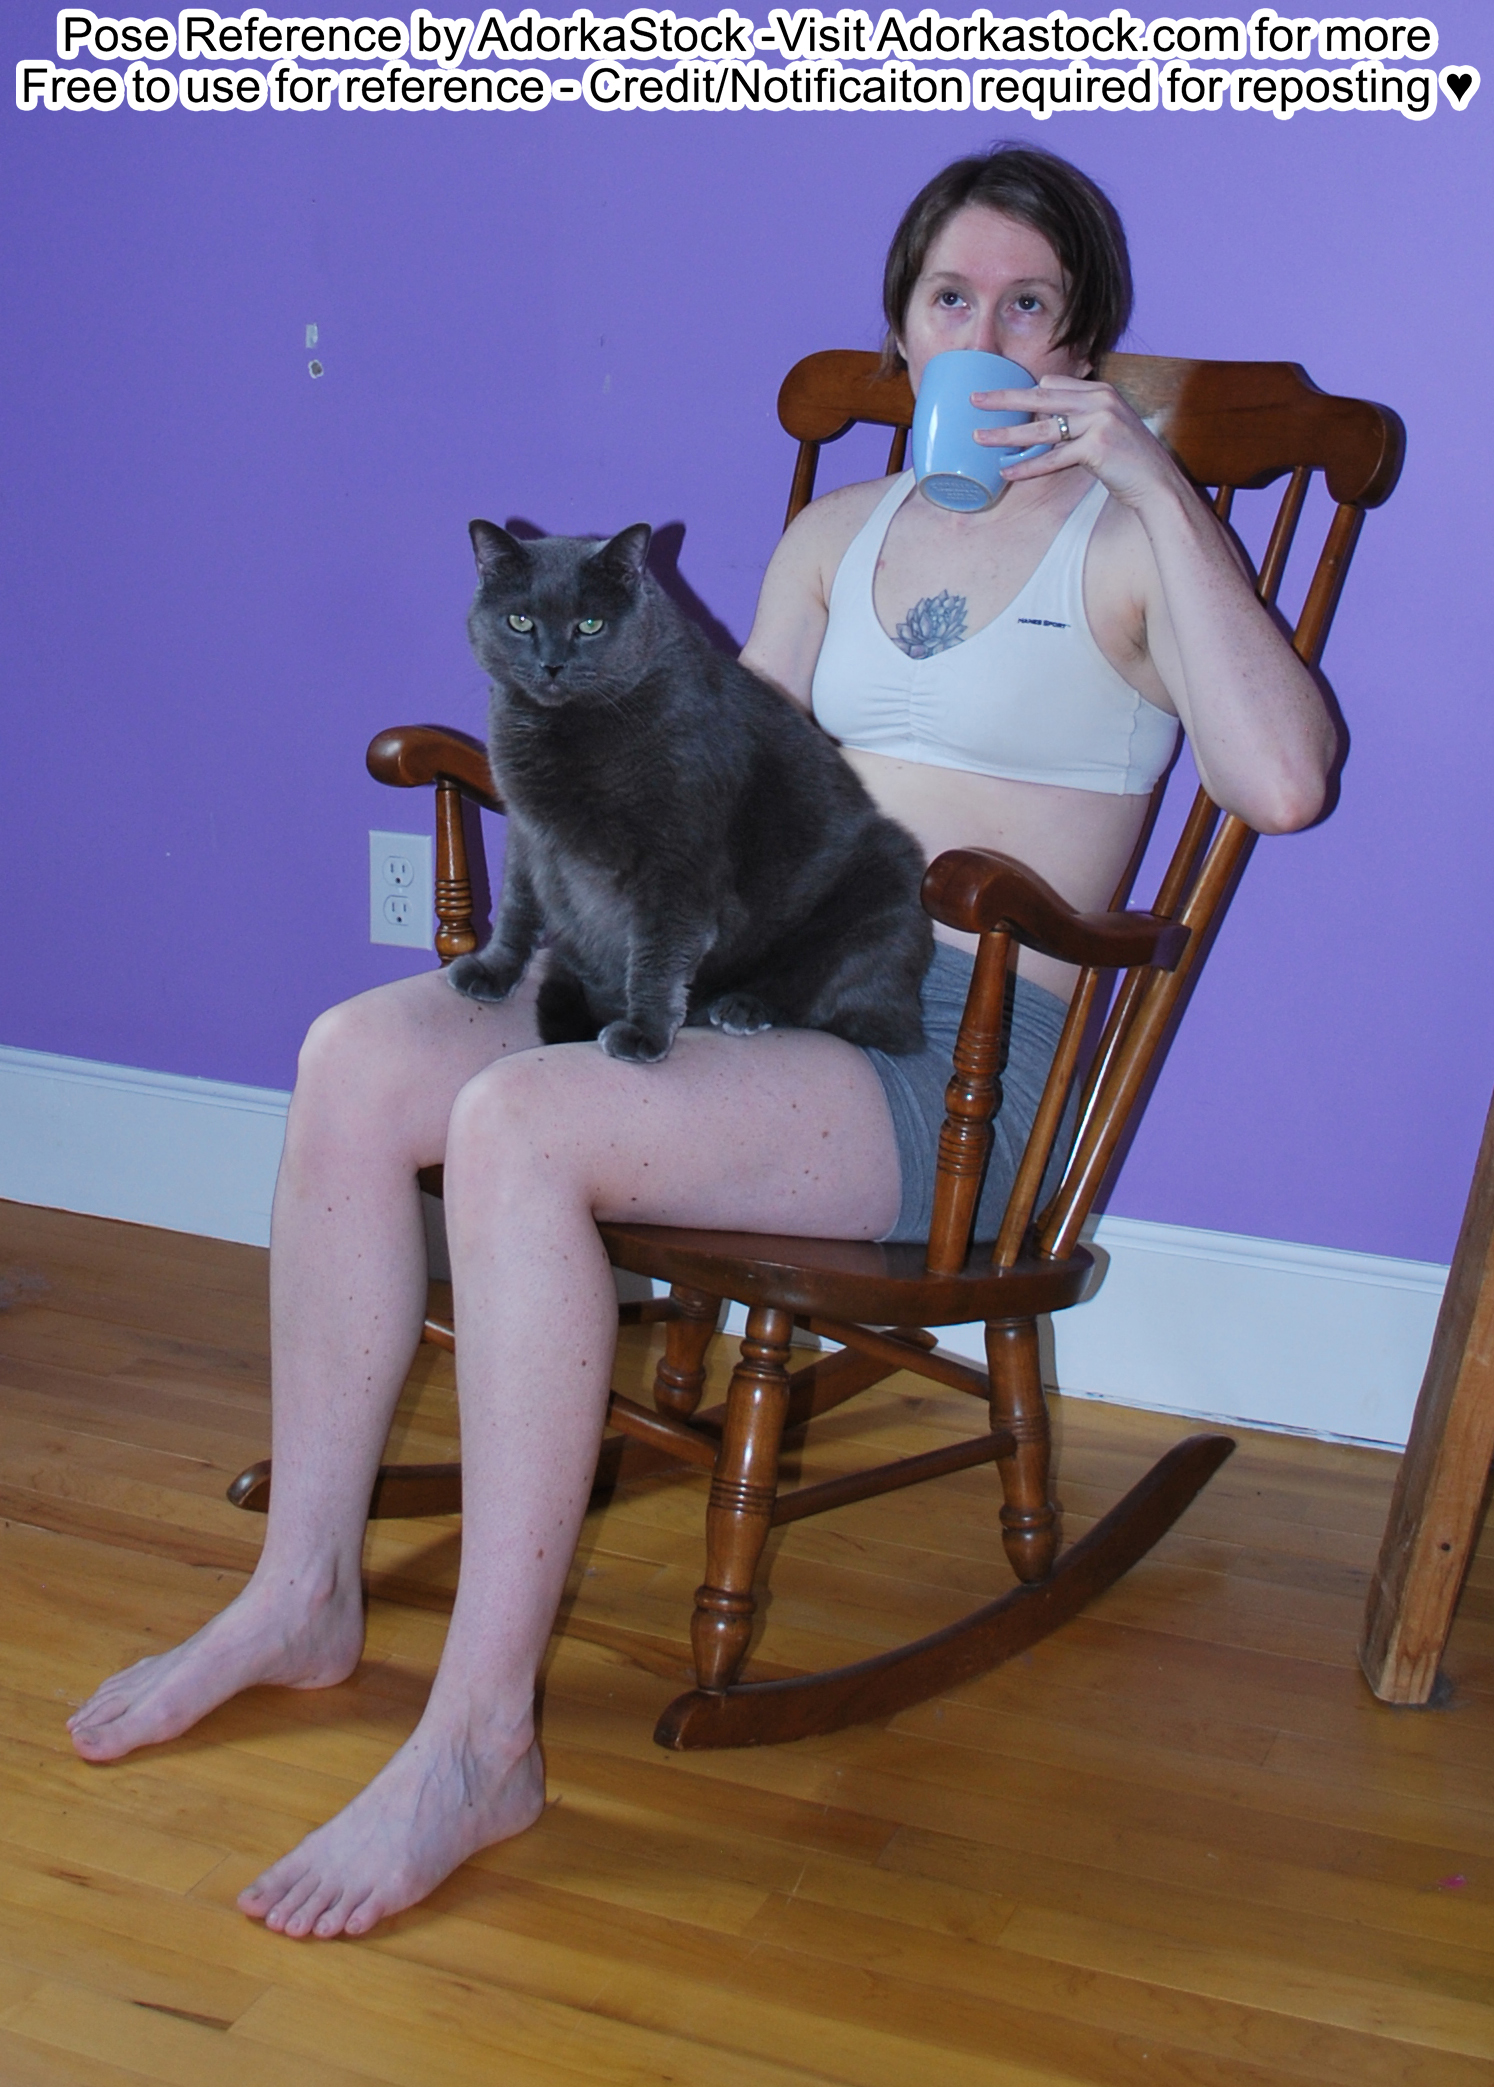 Sitting in a rocking chair, sipping a mug with a huge gray cat on lap pose reference